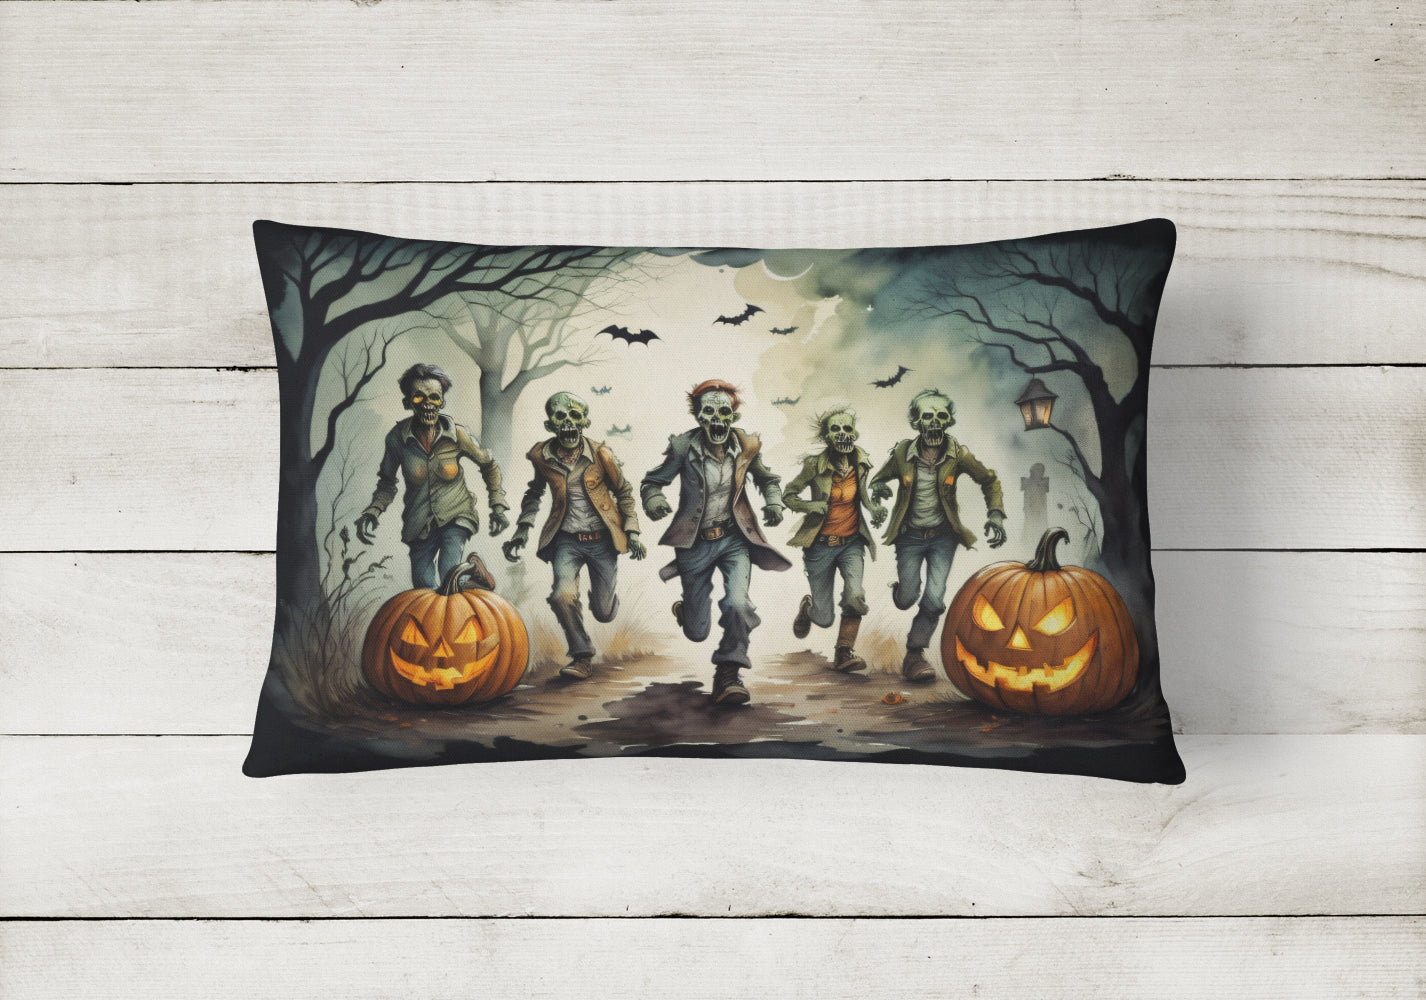 Buy this Zombies Spooky Halloween Fabric Decorative Pillow